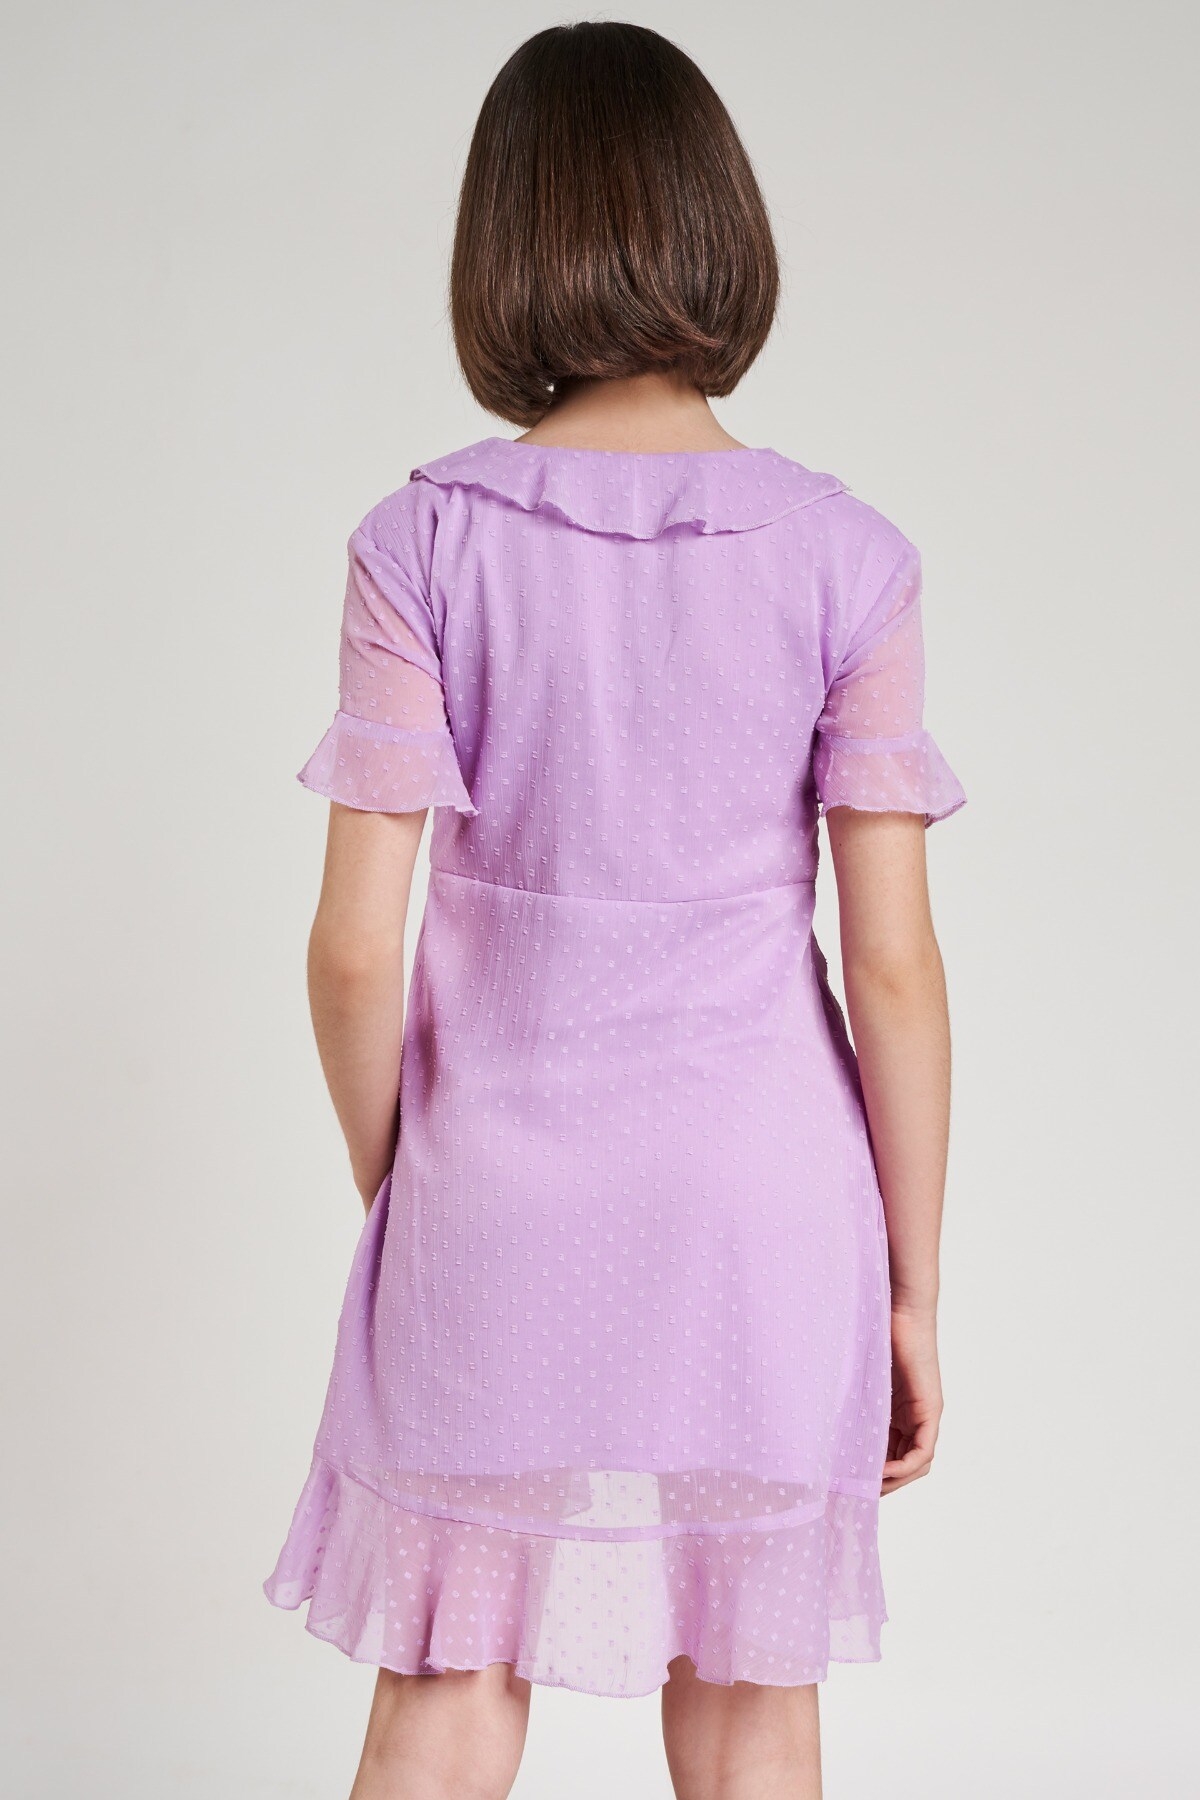 AND | Lilac Self Design Fit And Flare Dress 2